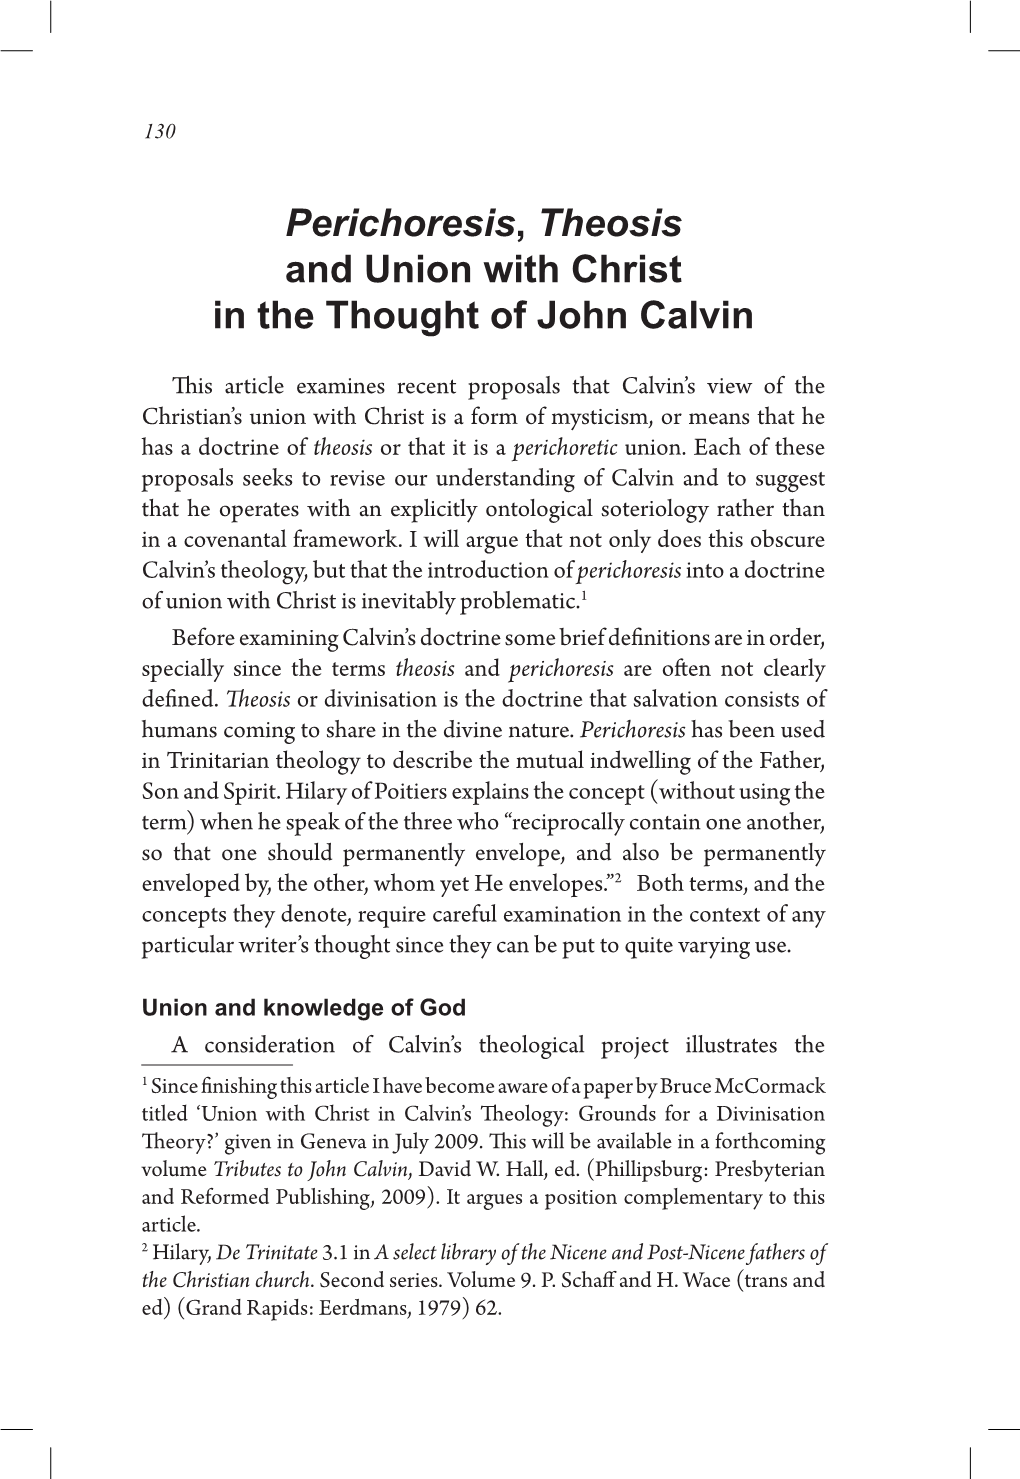 Perichoresis, Theosis and Union with Christ in the Thought of John Calvin